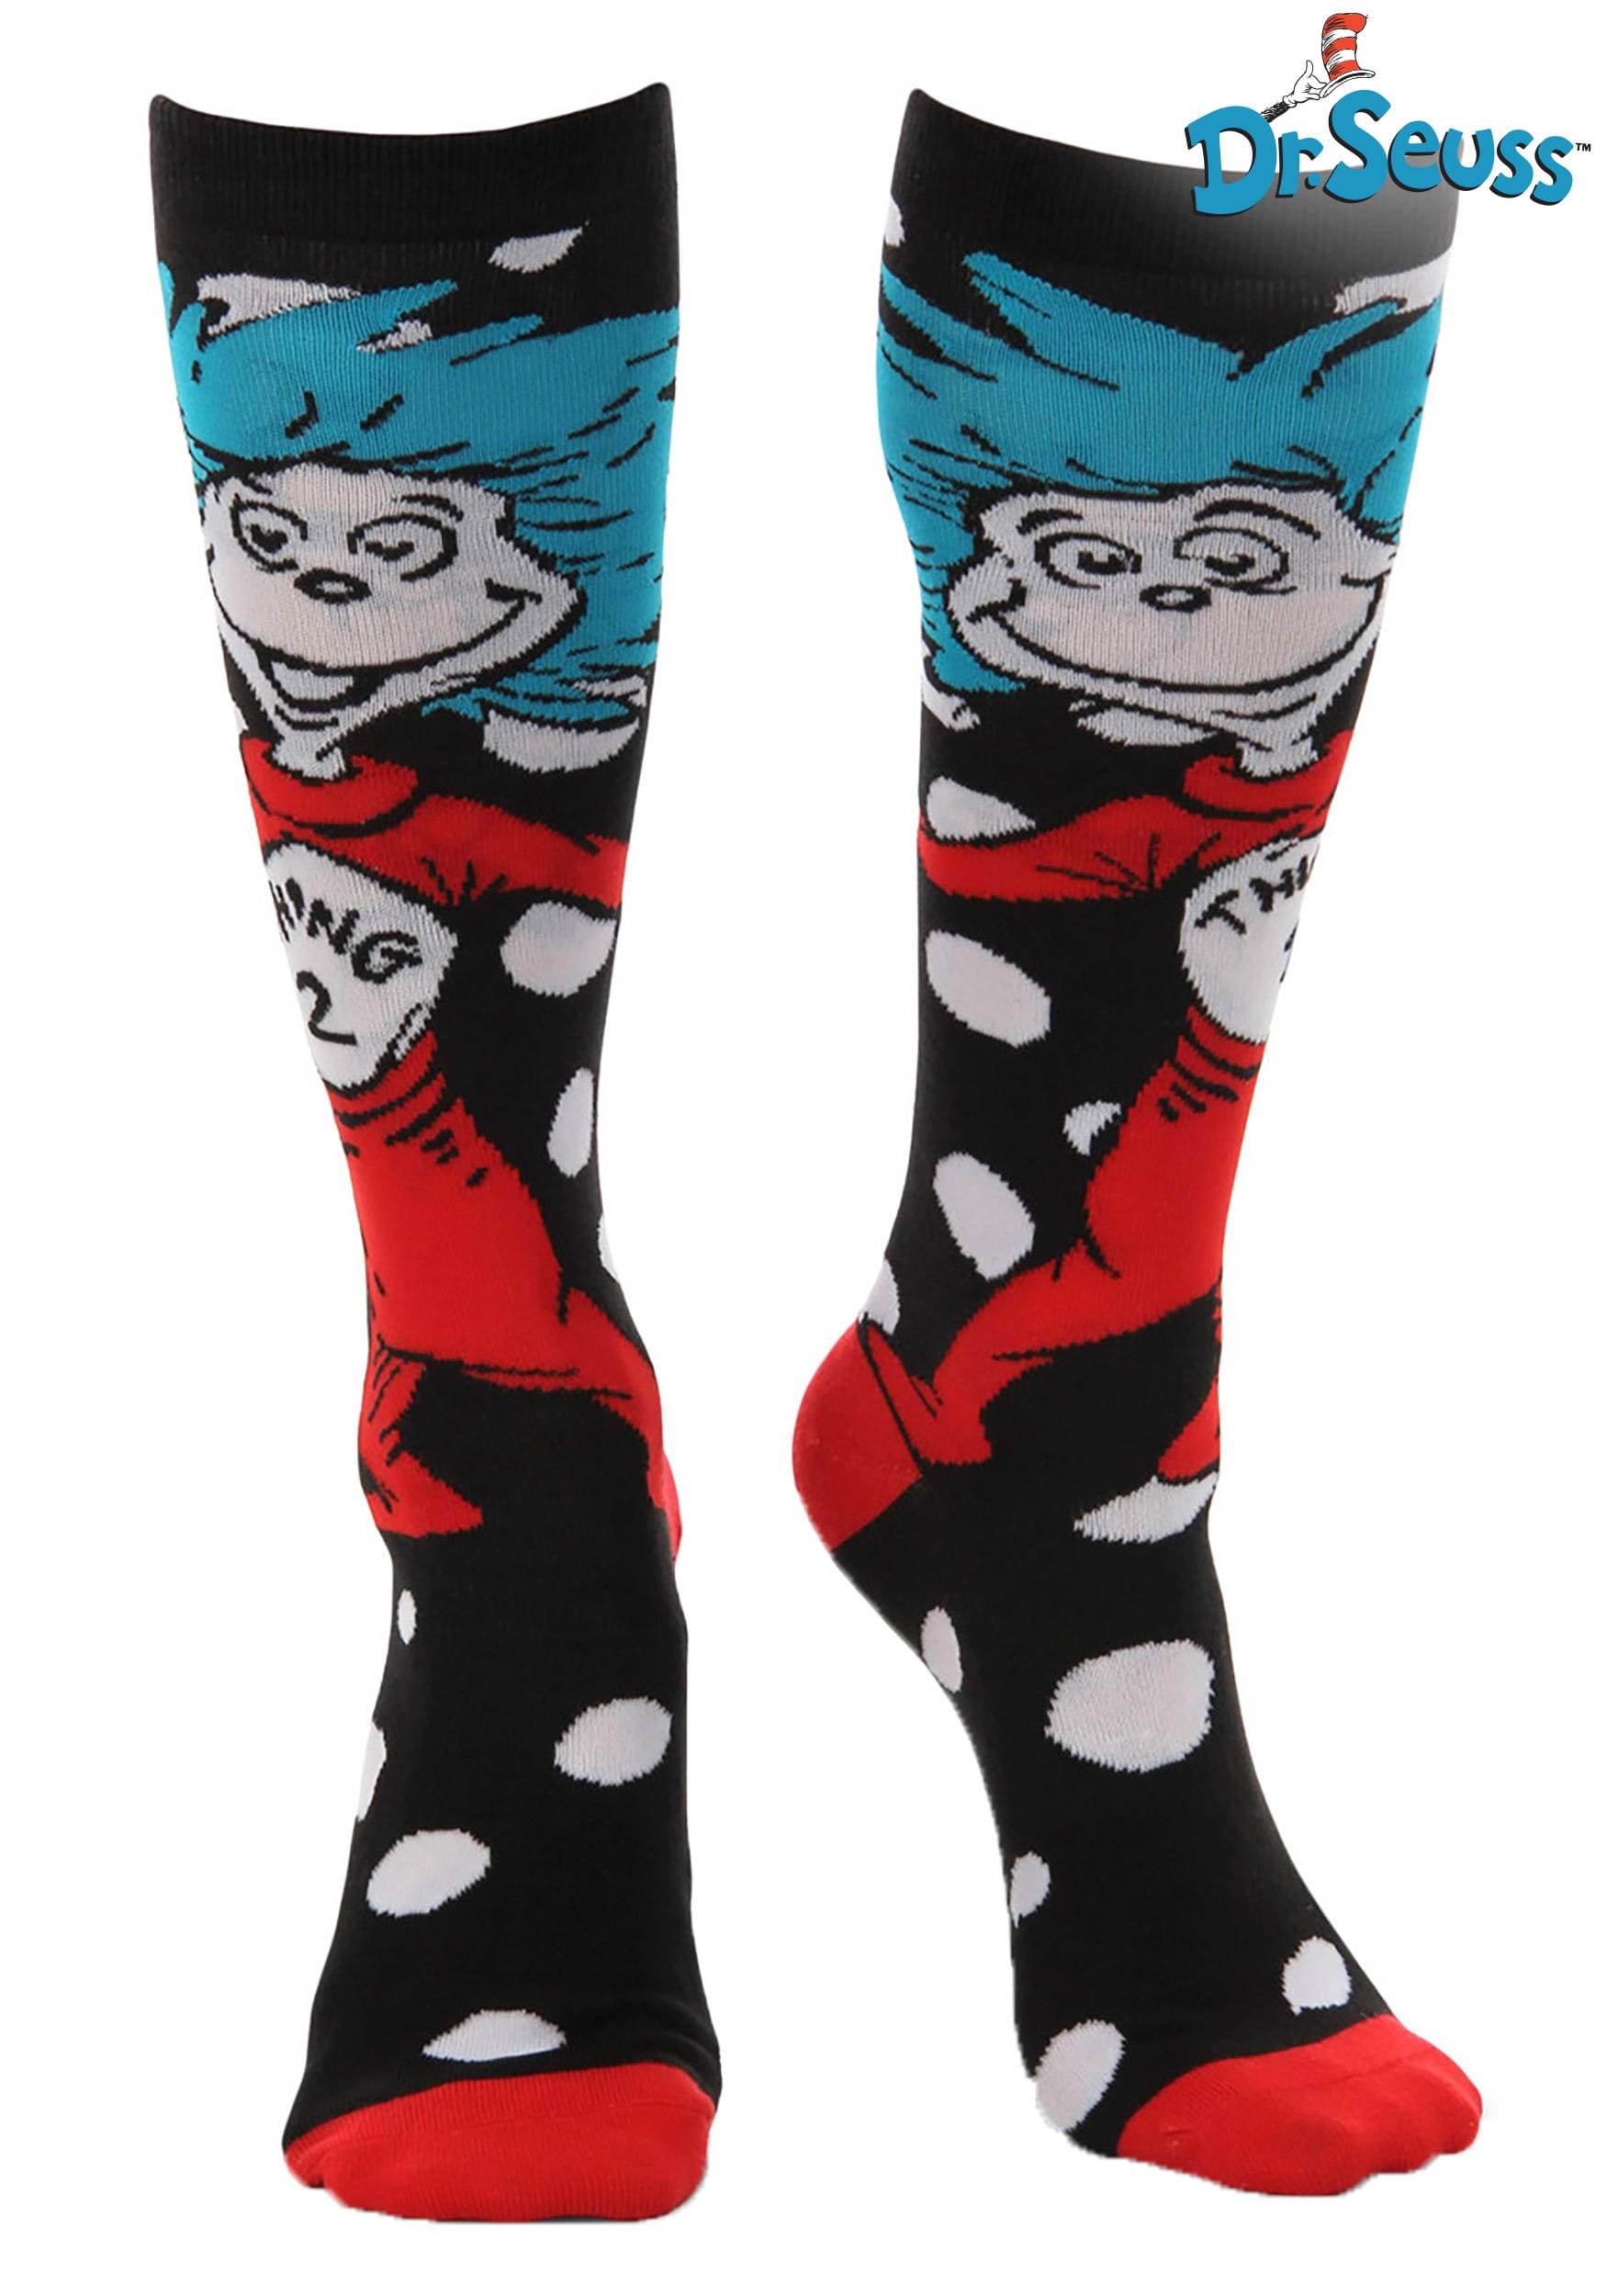 Thing 1 and Thing 2 Knee High Costume Socks